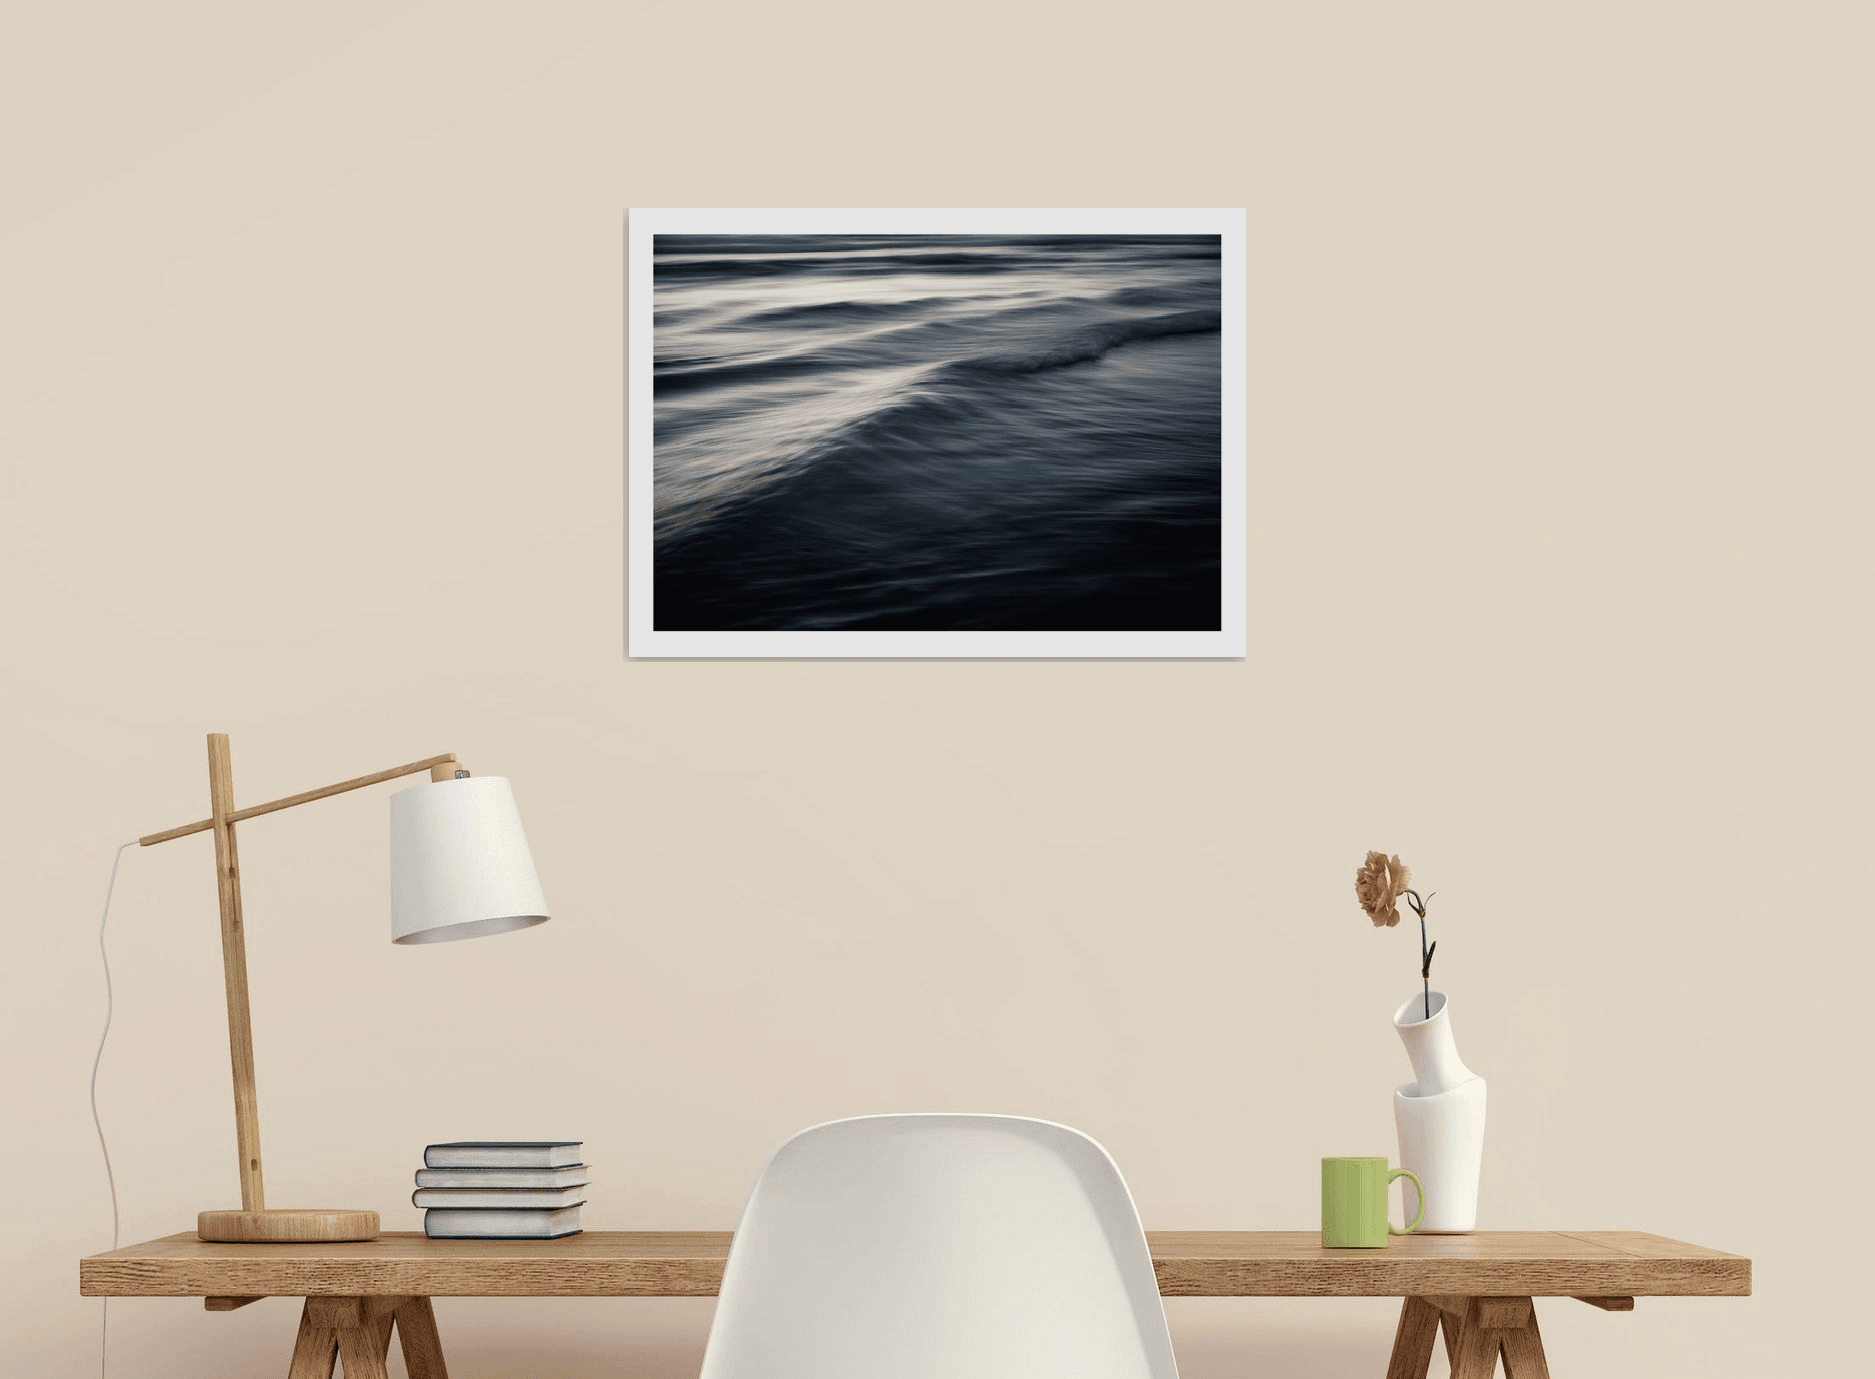 The Uniqueness of Waves XXXIII | Limited Edition Fine Art Print 1 of 10 | 45 x 30 cm